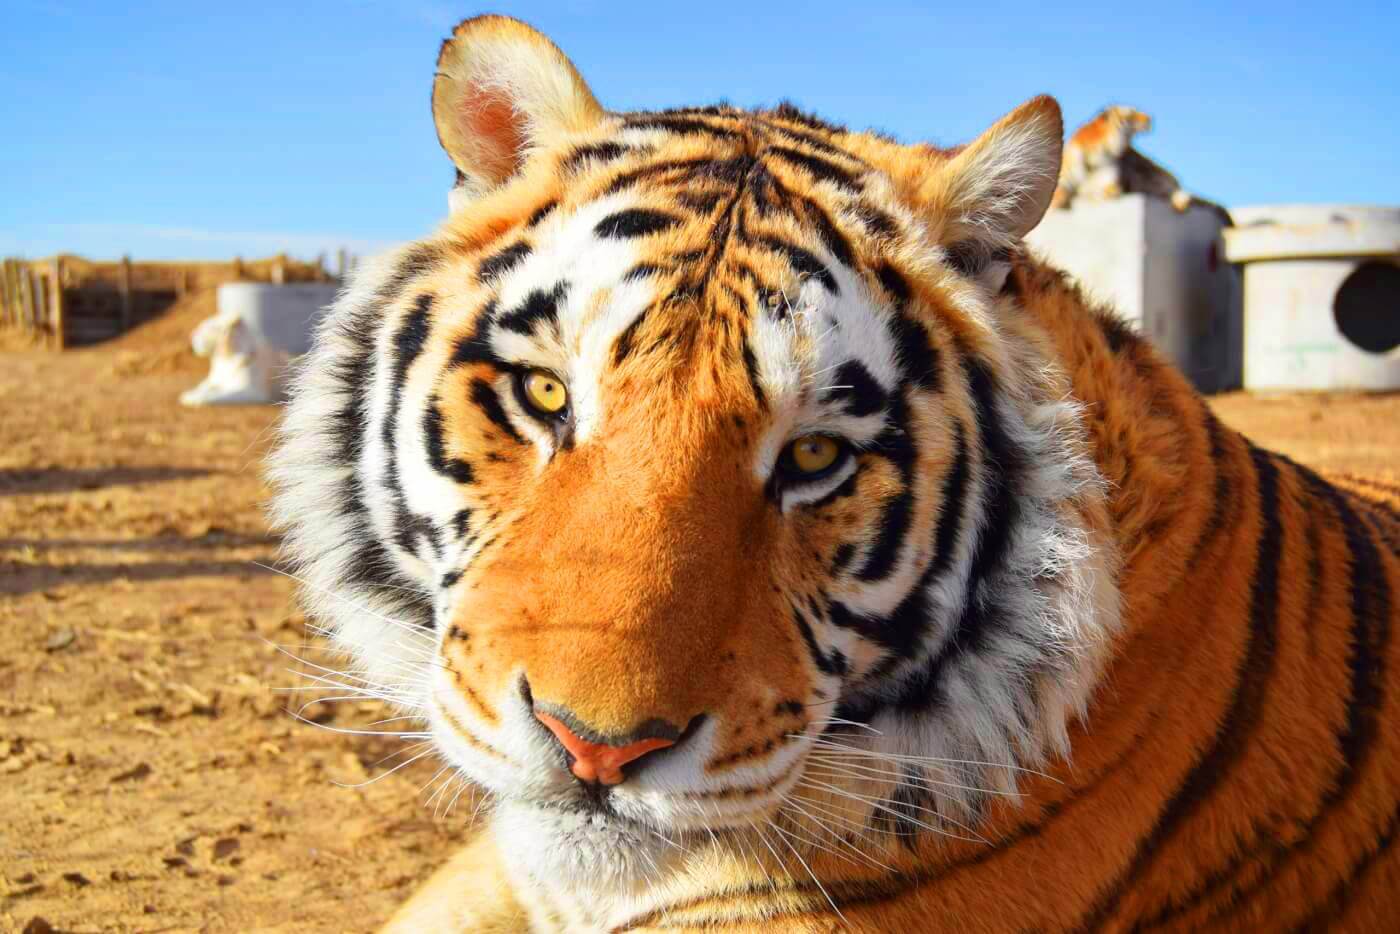 39 Tigers From 'Tiger King' Now at Accredited Sanctuary | PETA